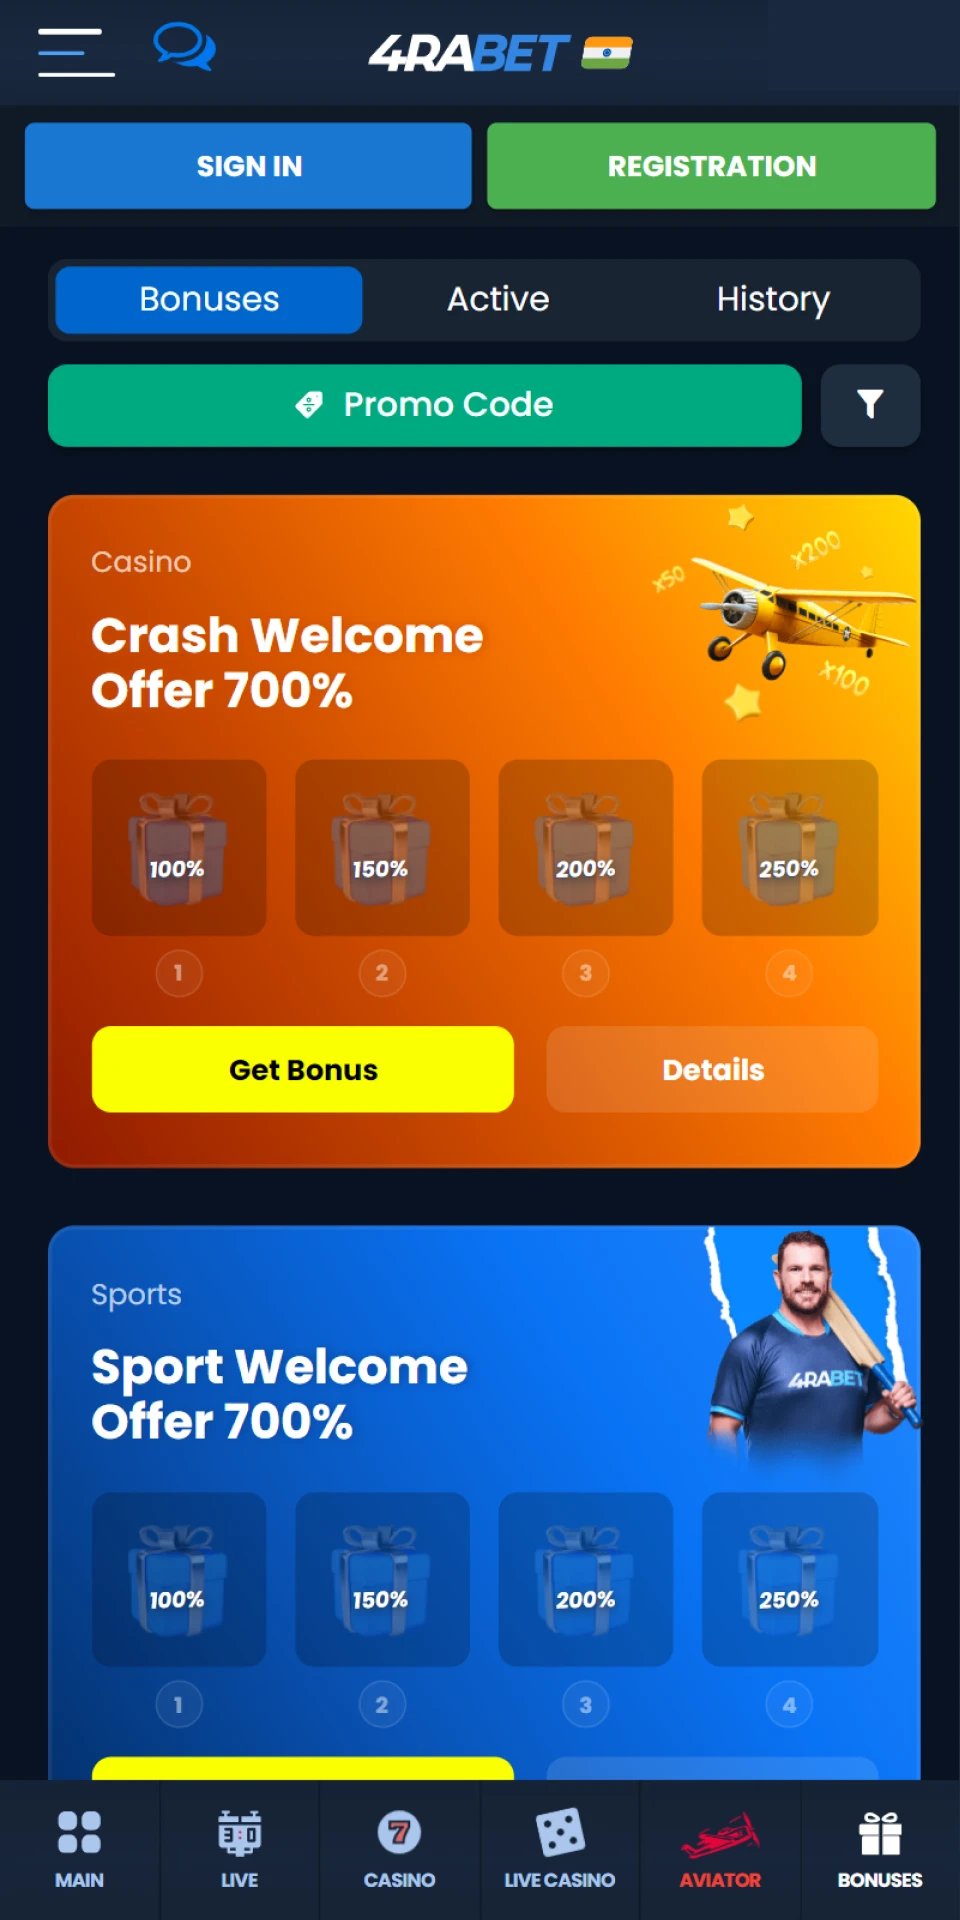 In the 4RaBet app you will find many sports bonuses and casino bonuses.